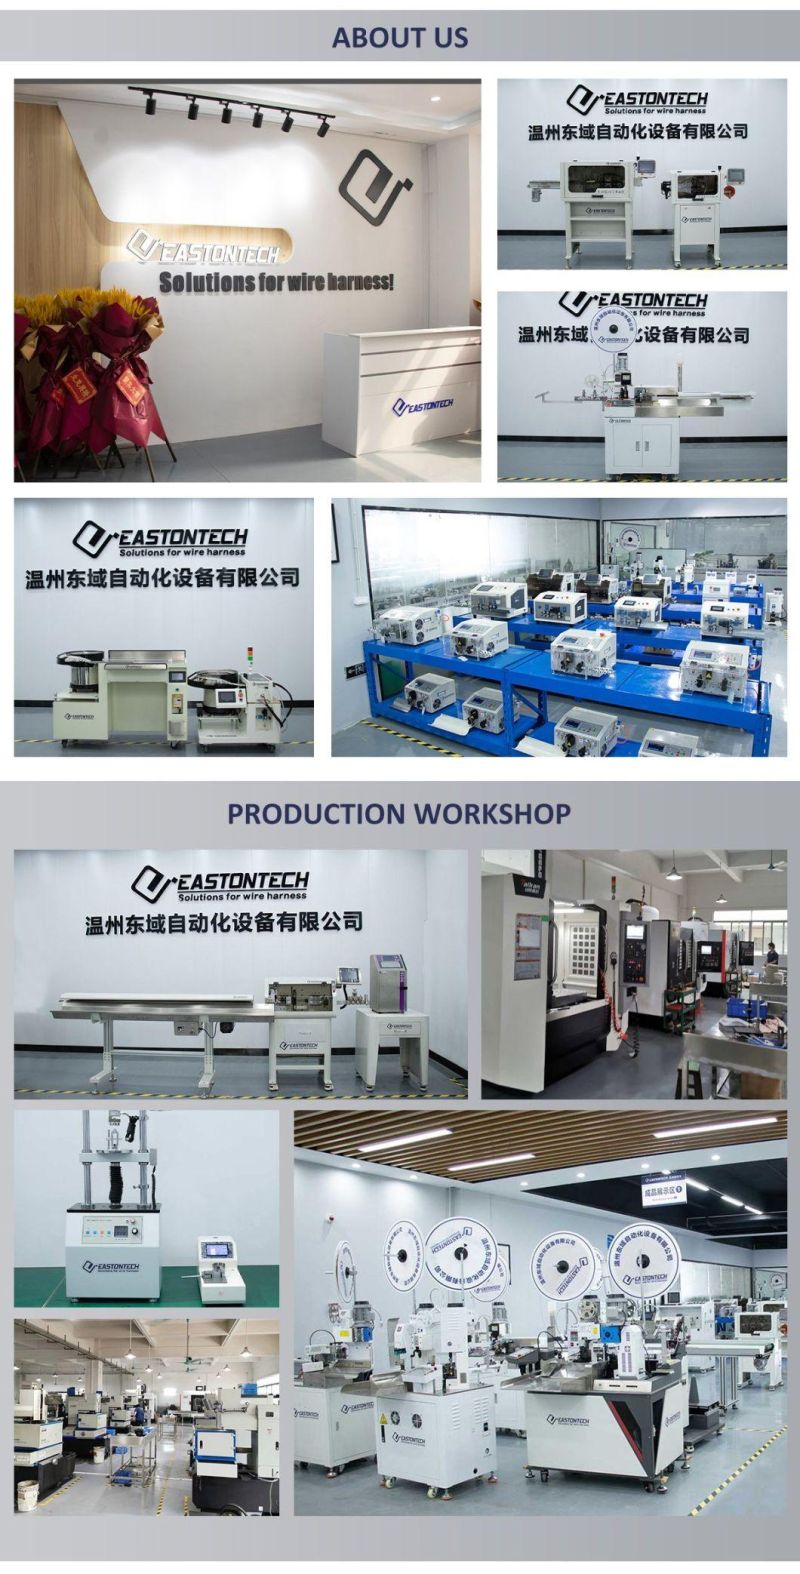 Fully Automatic 0.1-4.5mm2 Automatic Wire Cutting and Stripping Machine